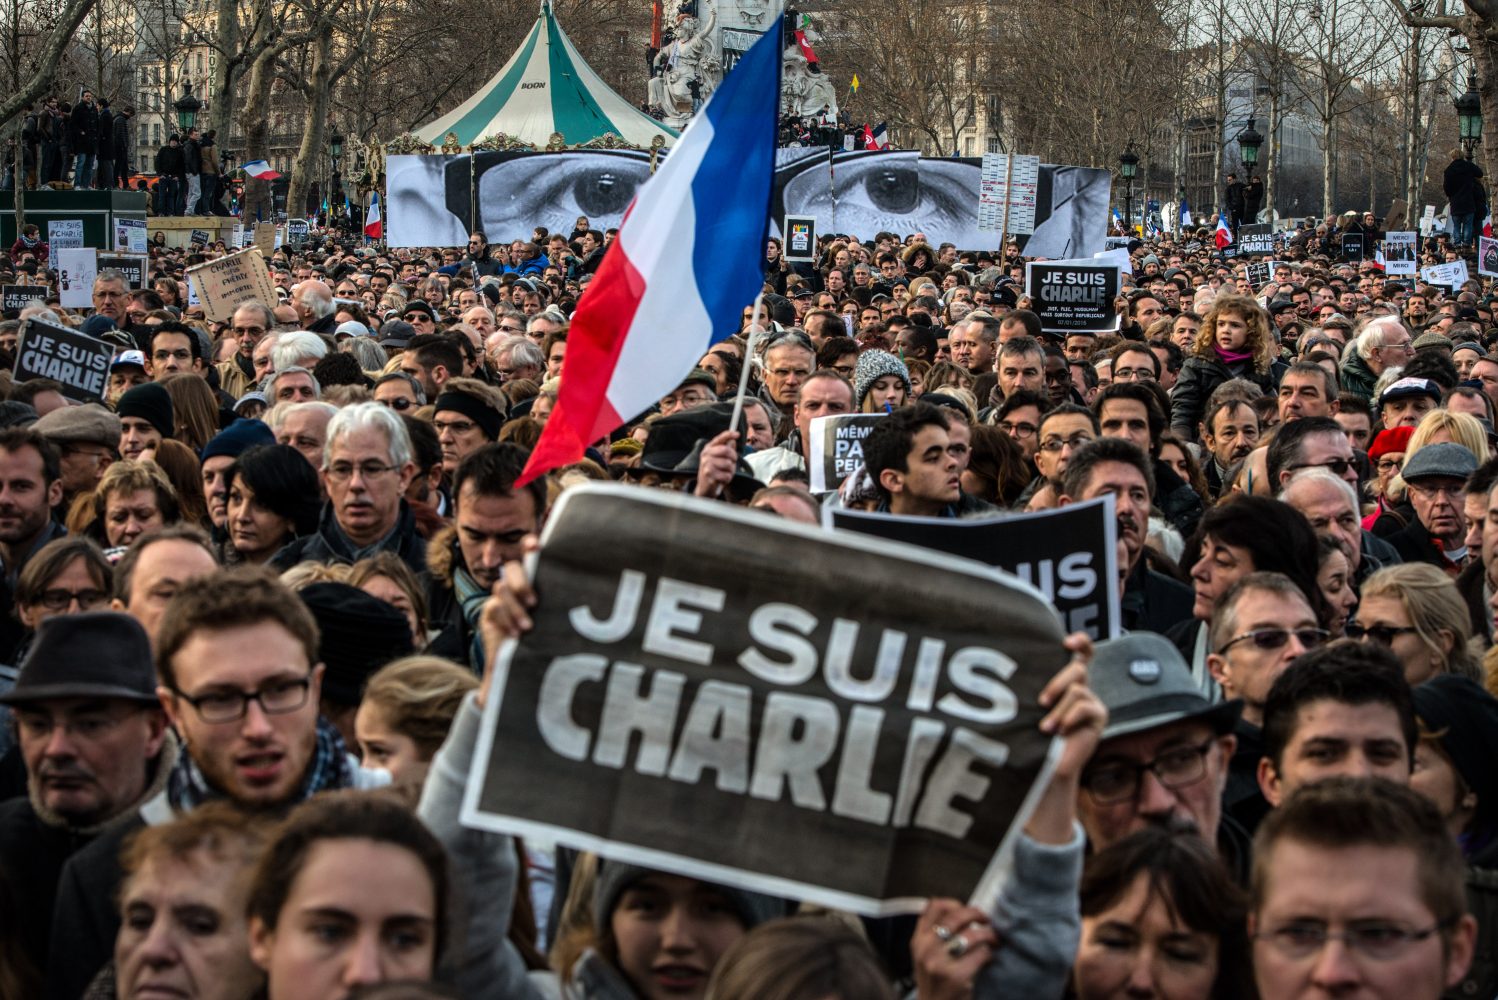 PARIS, FRANCE - JANUARY 11:  Demonstrators make their way along Place de la Republique during a mass unity rally following the recent terrorist attacks on January 11, 2015 in Paris, France. An estimated one million people have converged in central Paris for the Unity March joining in solidarity with the 17 victims of this weeks terrorist attacks in the country. French President Francois Hollande led the march and was joined by world leaders in a sign of unity. The terrorist atrocities started on Wednesday with the attack on the French satirical magazine Charlie Hebdo, killing 12, and ended on Friday with sieges at a printing company in Dammartin en Goele and a Kosher supermarket in Paris with four hostages and three suspects being killed. A fourth suspect, Hayat Boumeddiene, 26, escaped and is wanted in connection with the murder of a policewoman.  (Photo by David Ramos/Getty Images) ORG XMIT: 531669519 ORIG FILE ID: 461341606